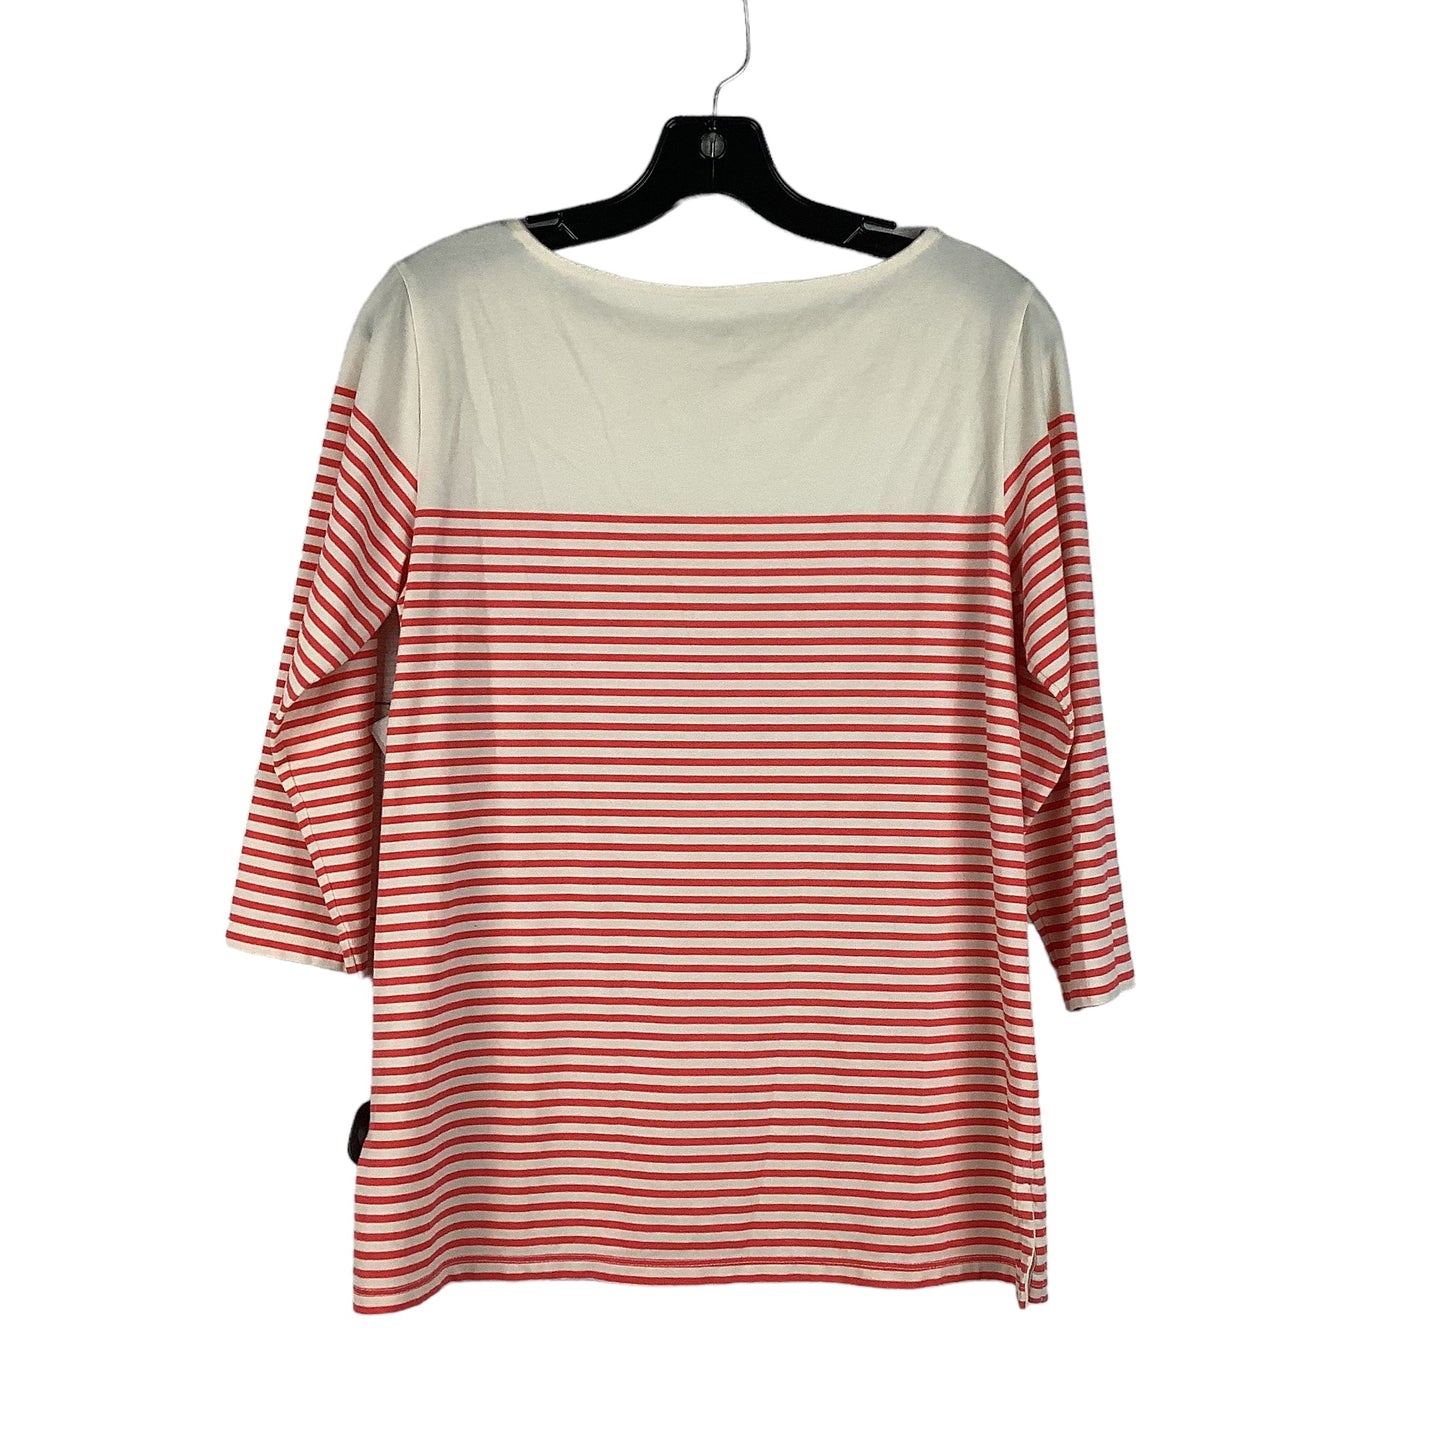 Striped Pattern Top Long Sleeve Designer Spartina, Size S